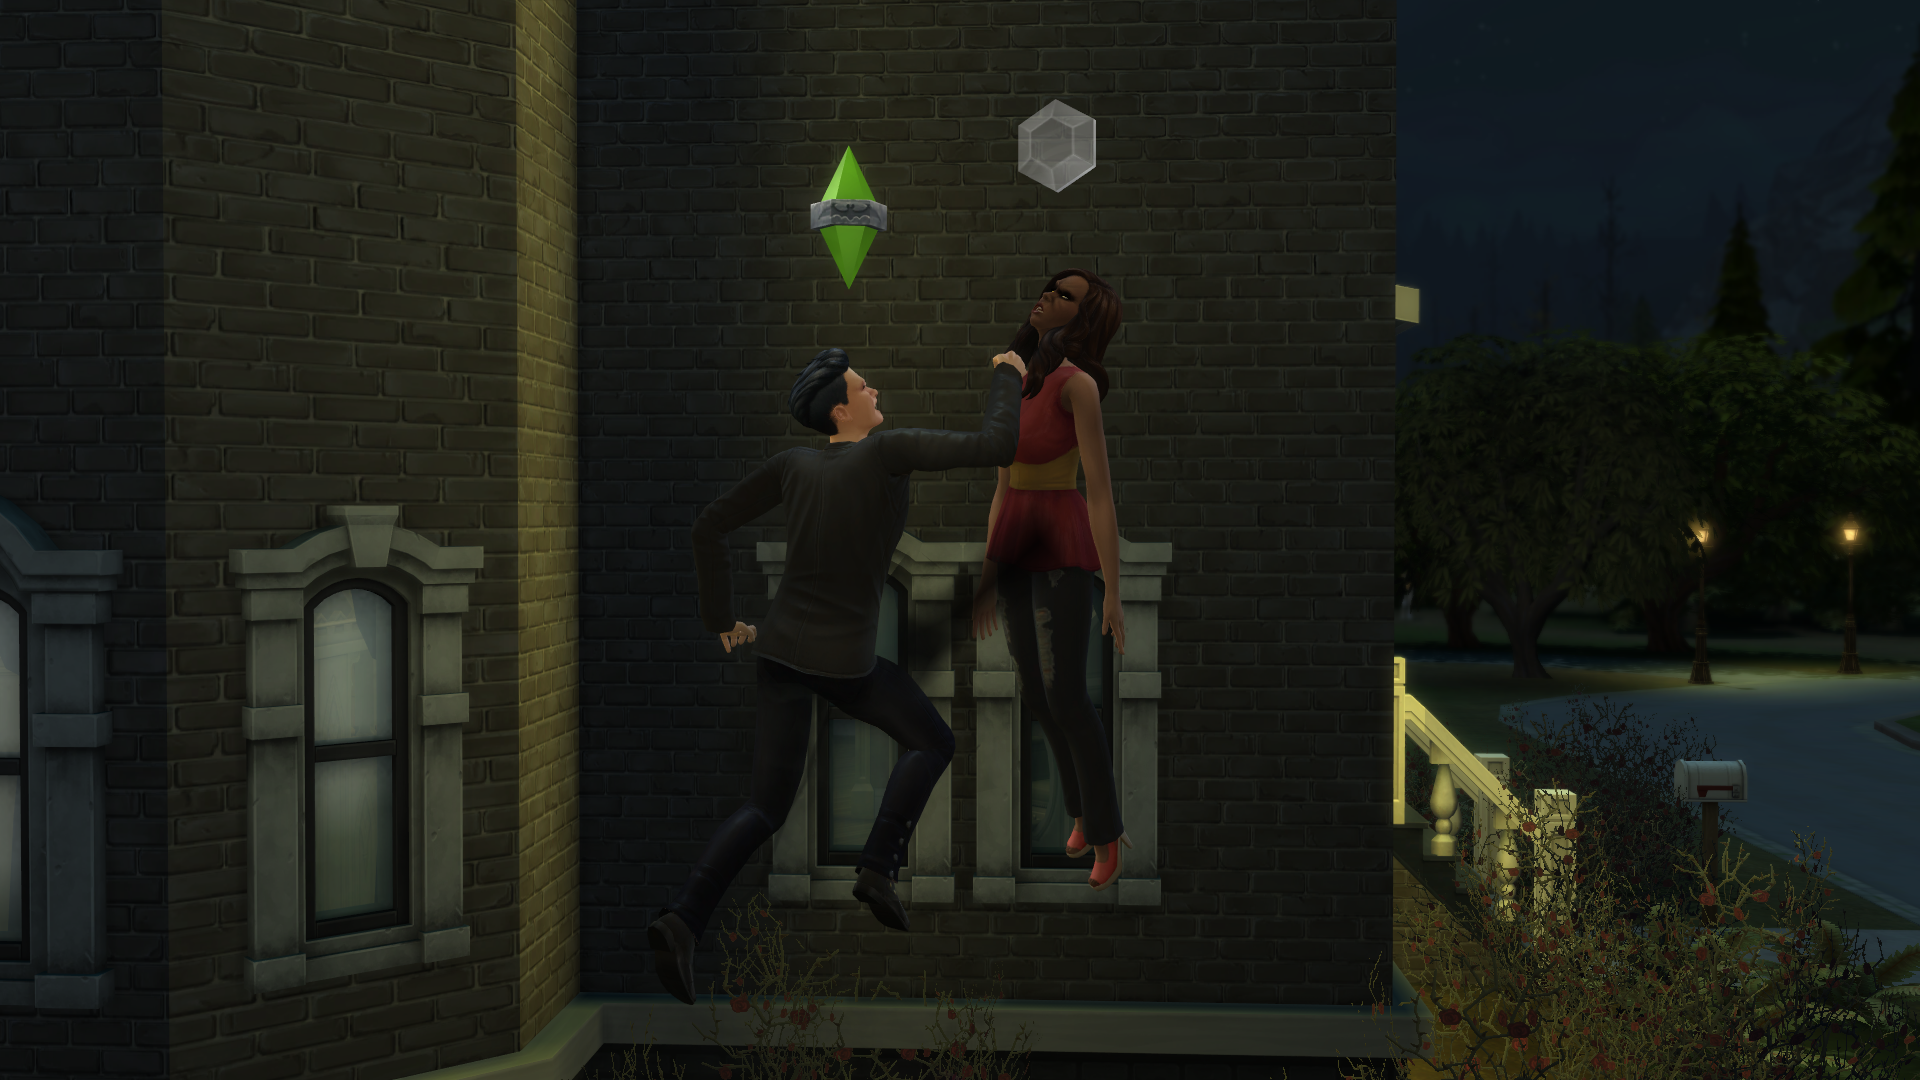 The Sims 4 Vampires Game Pack Review Simsvip